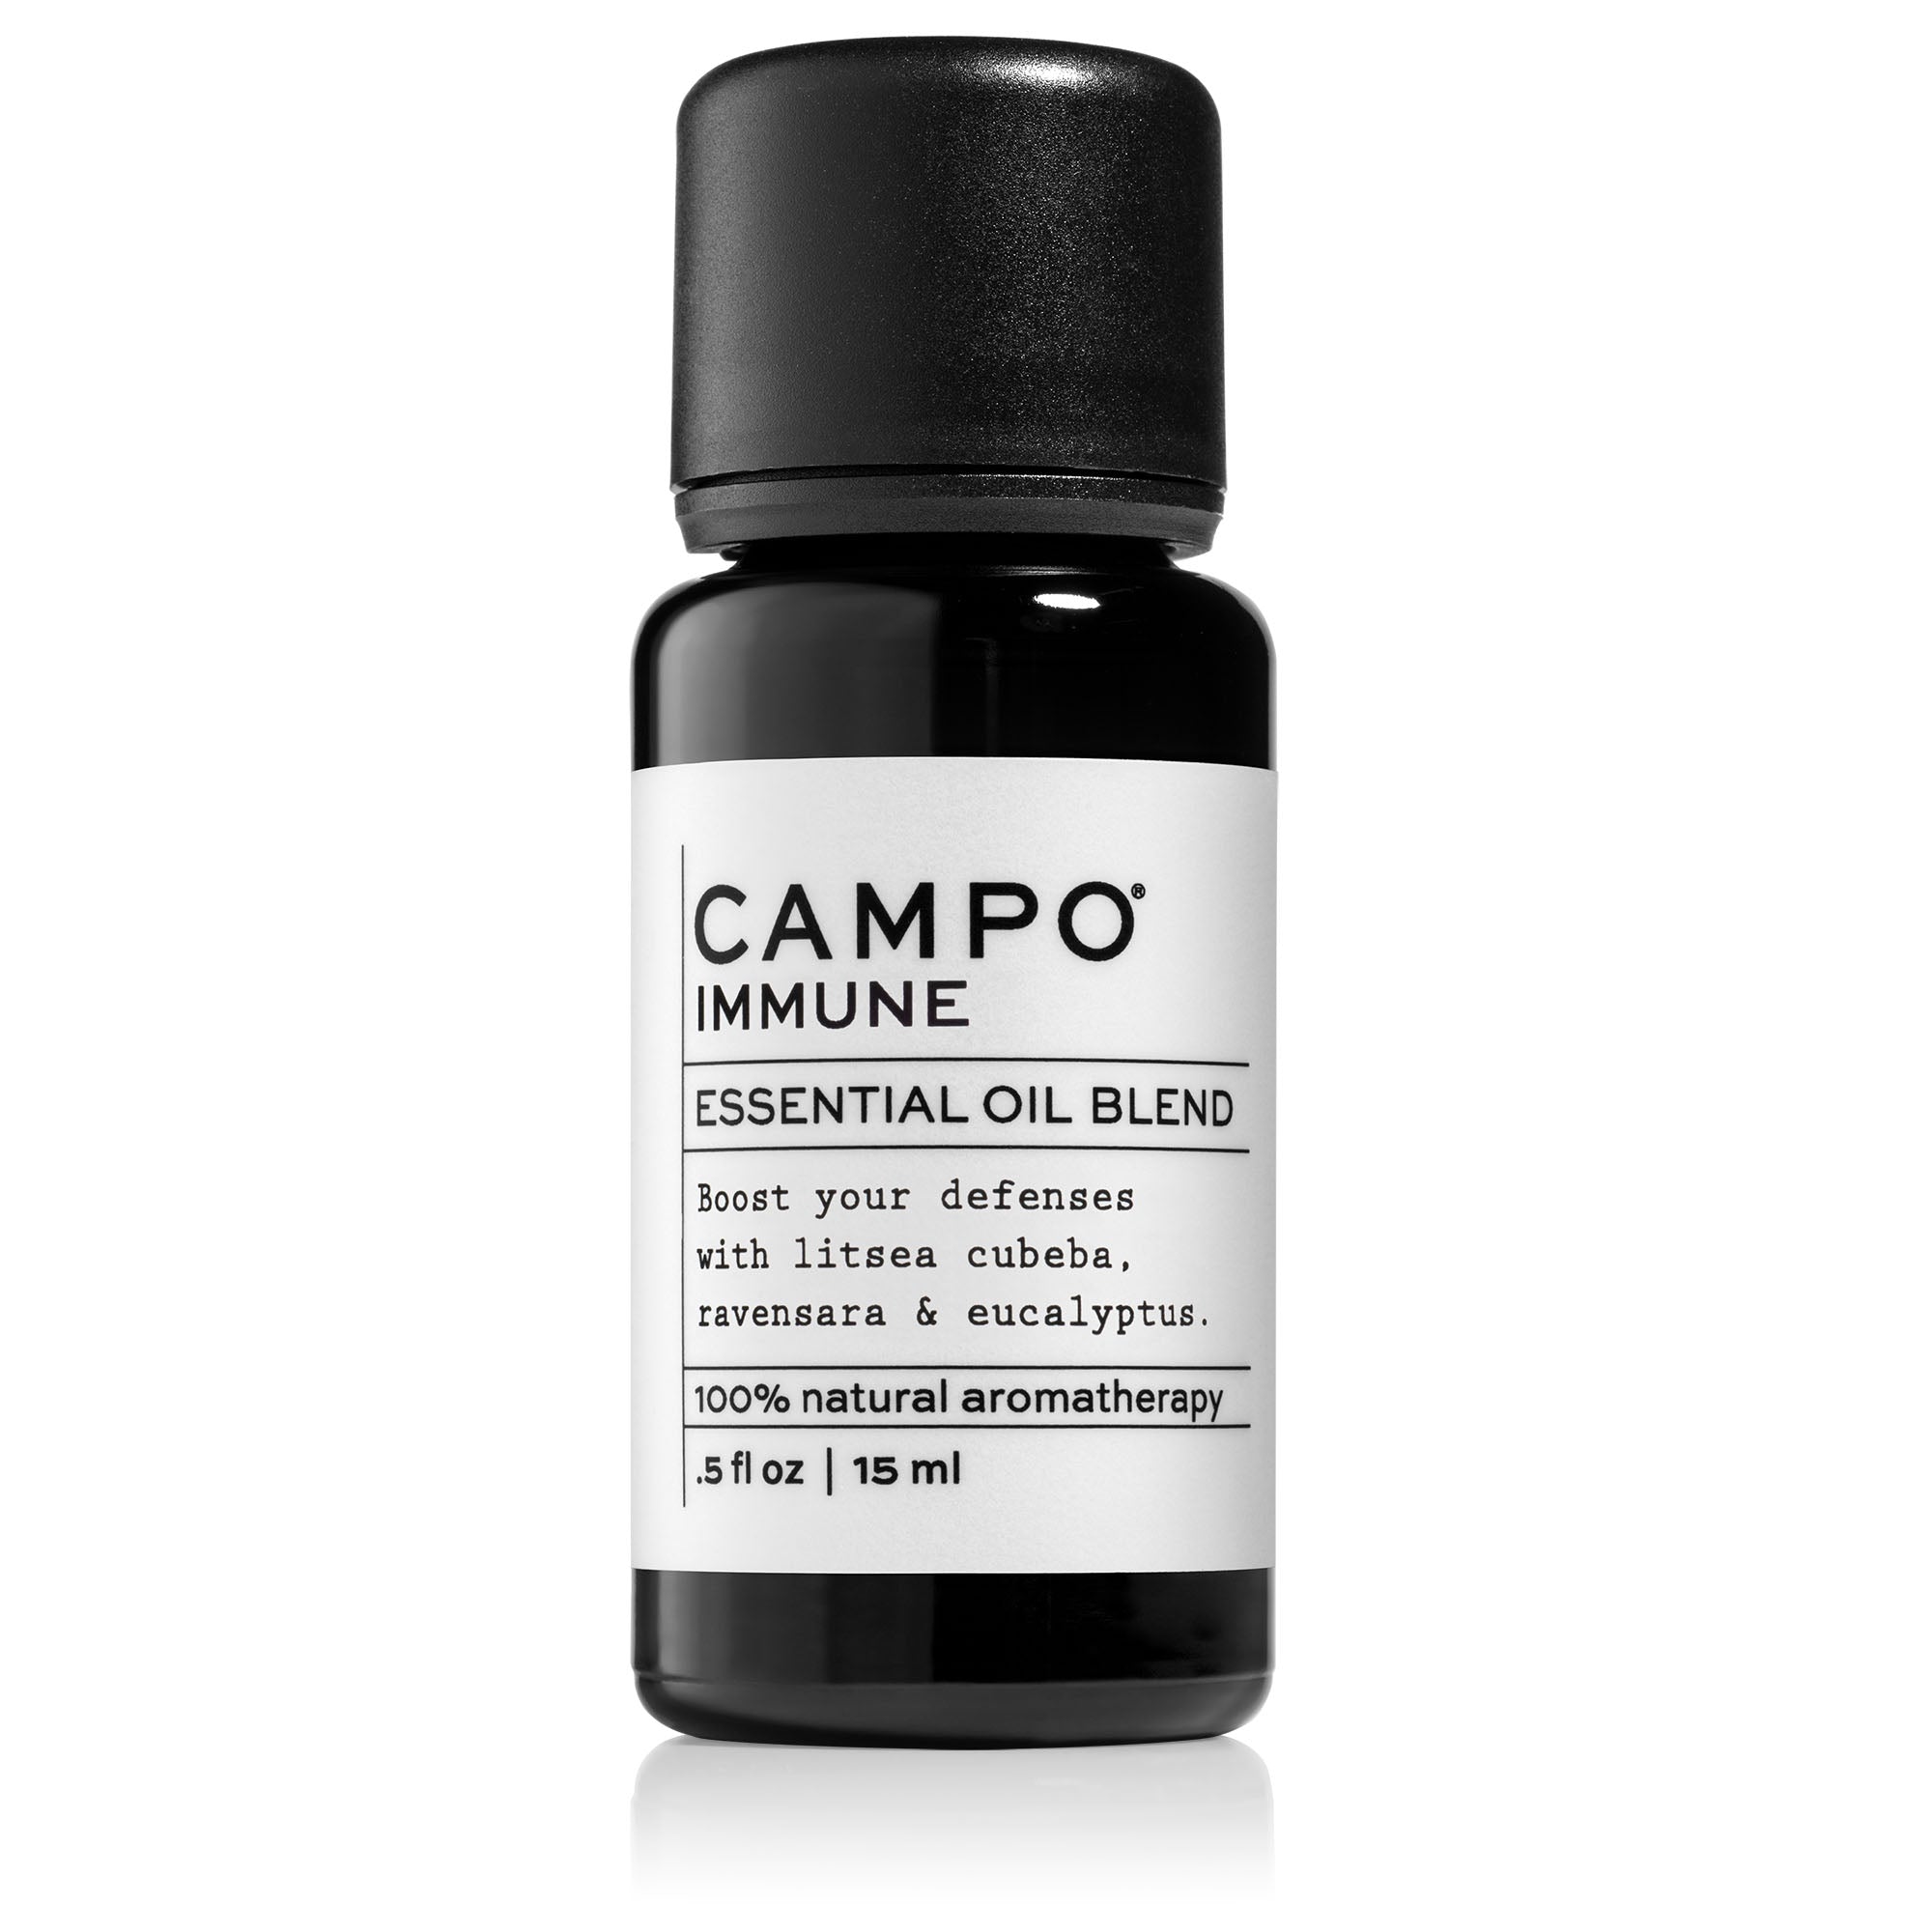 Campo Beauty IMMUNE Blend 15 ml Essential Oil. Boost your defenses with this 100% natural essential oil blend of litsea cubeba, ravensara & eucalyptus.